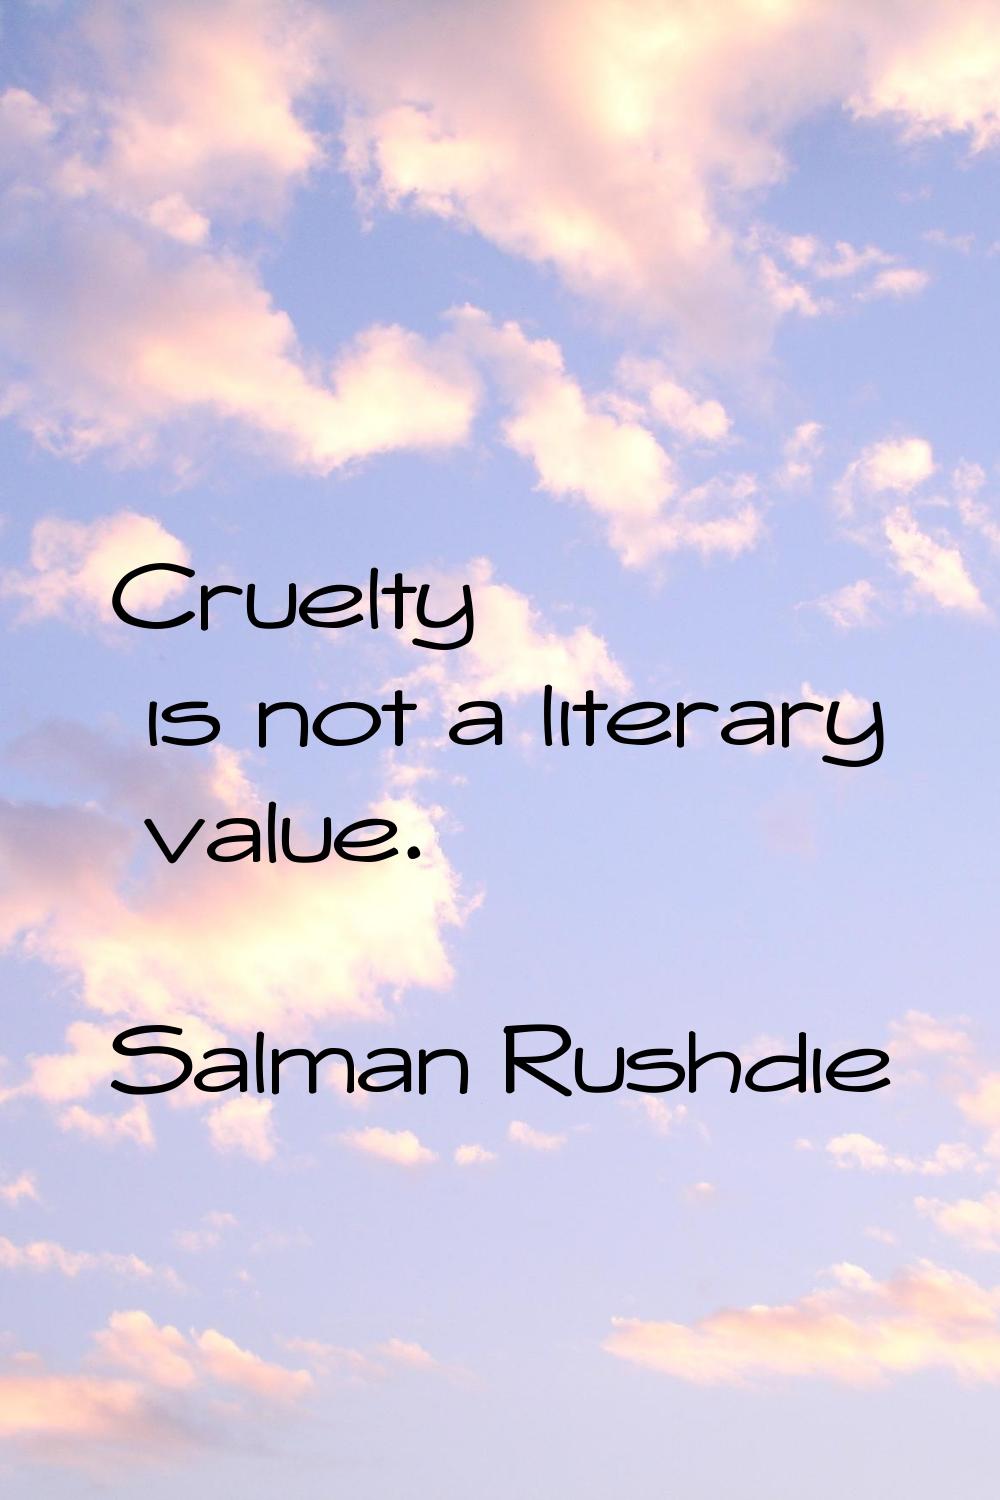 Cruelty is not a literary value.